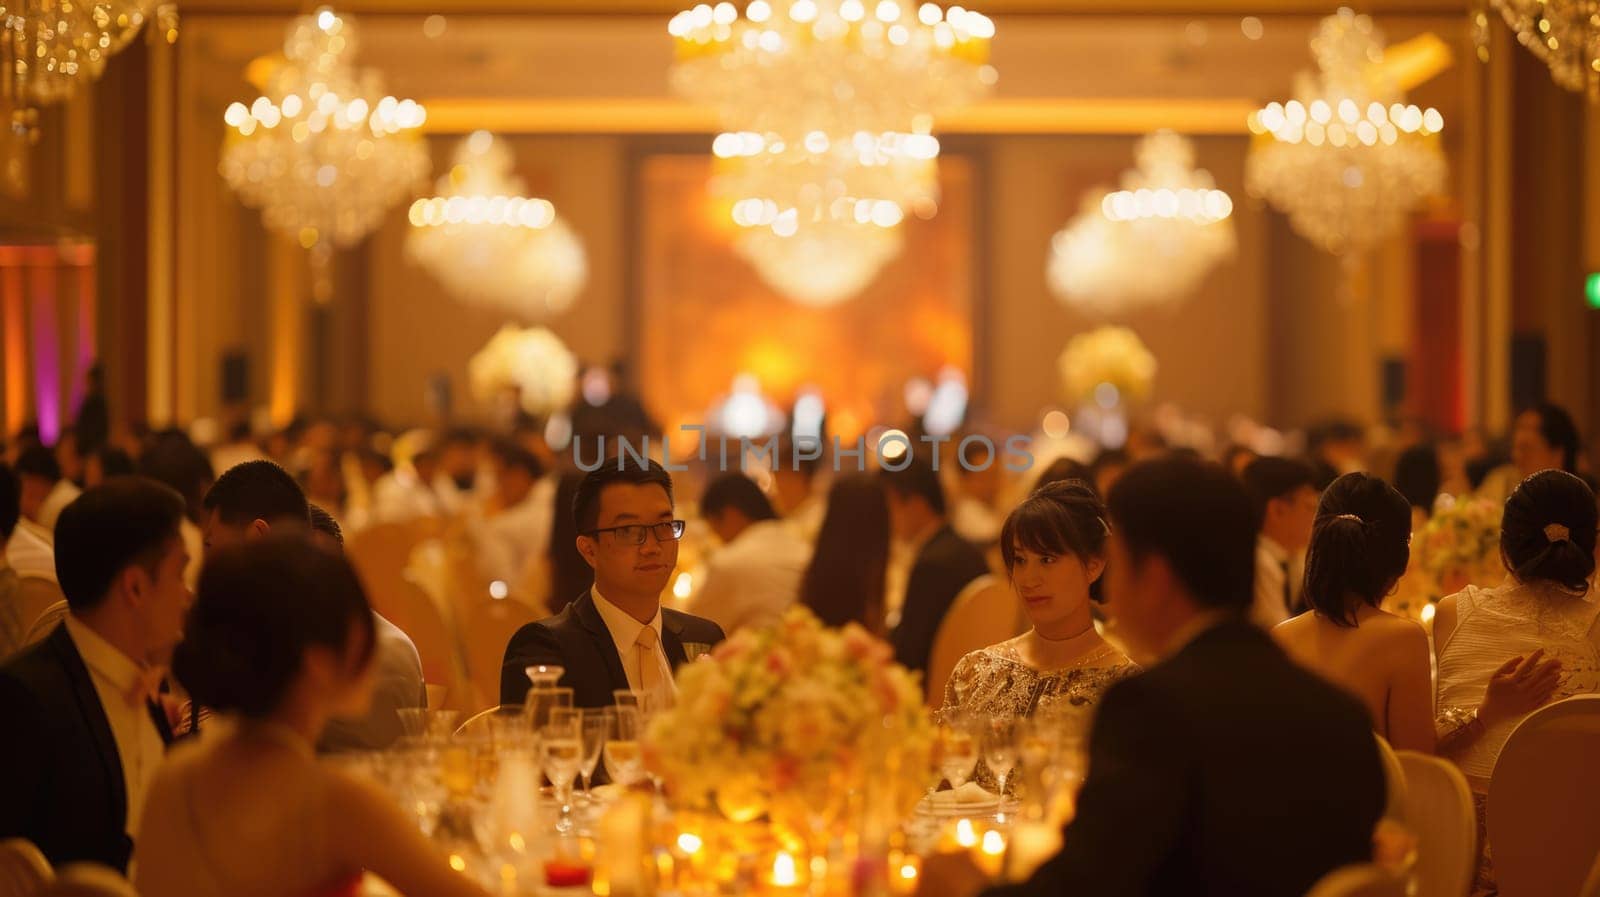 An elegant evening event, people in formal attire, beautifully. Resplendent. by biancoblue